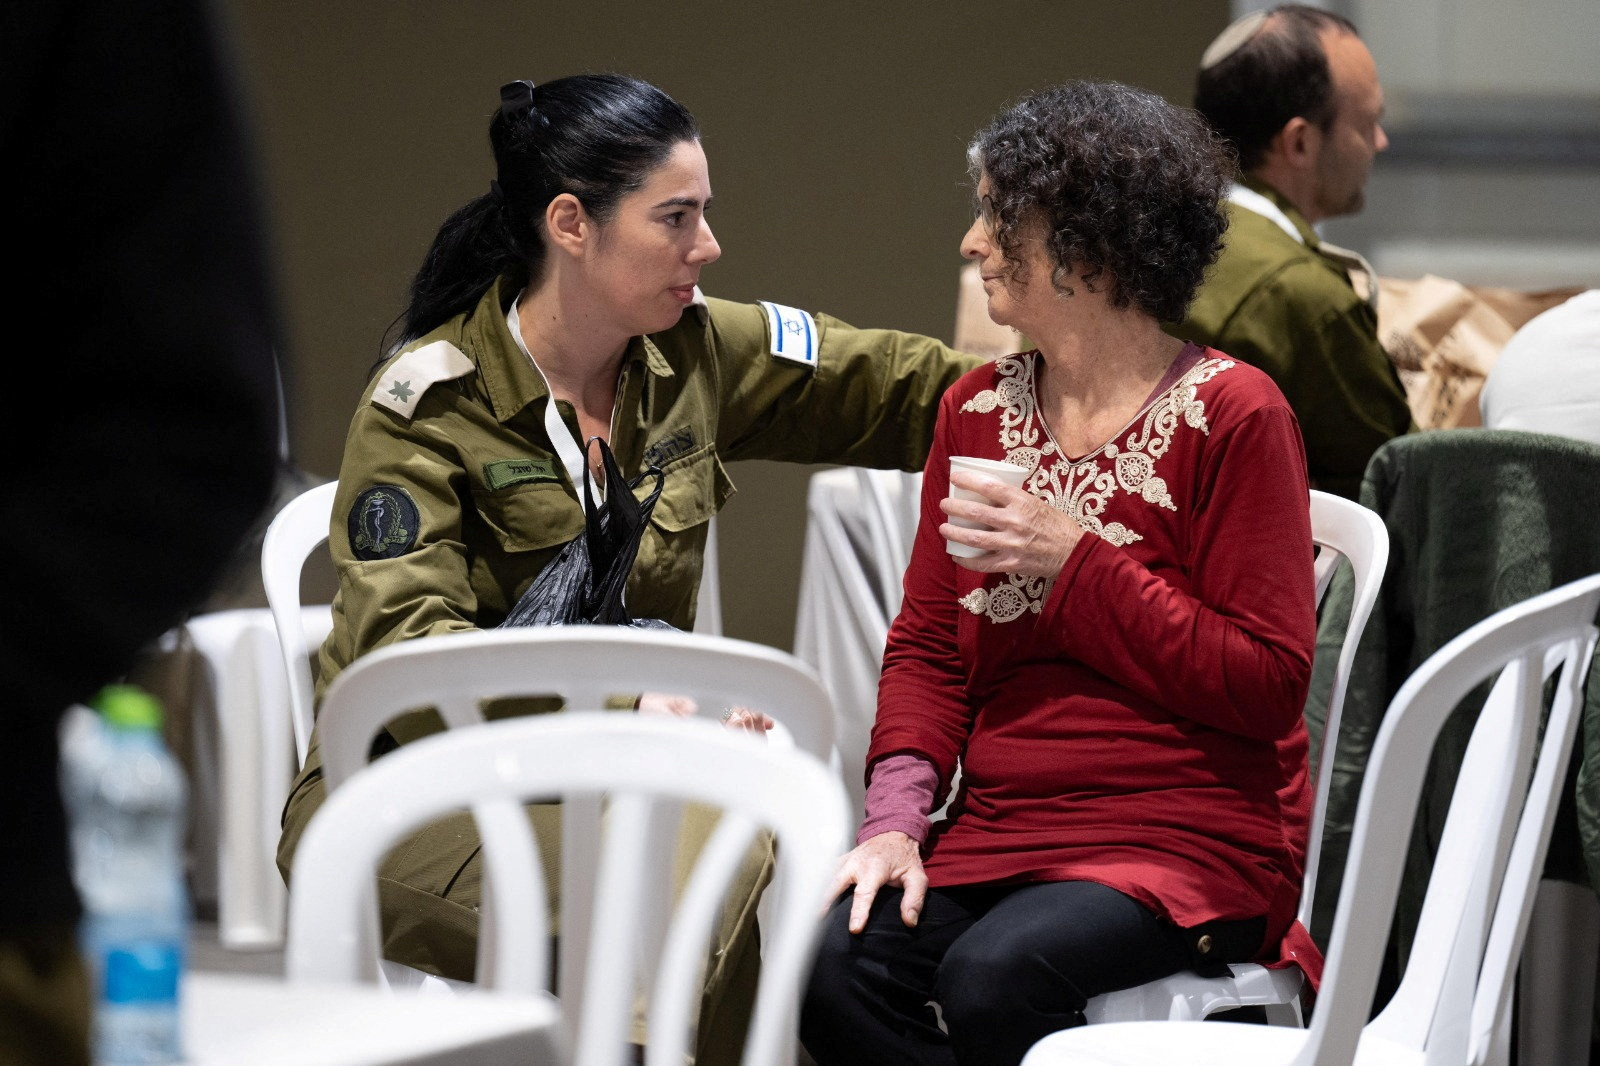 Shoshan Haran, a released Israeli hostage, speaks with an Israeli soldier shortly after her arrival in Israel